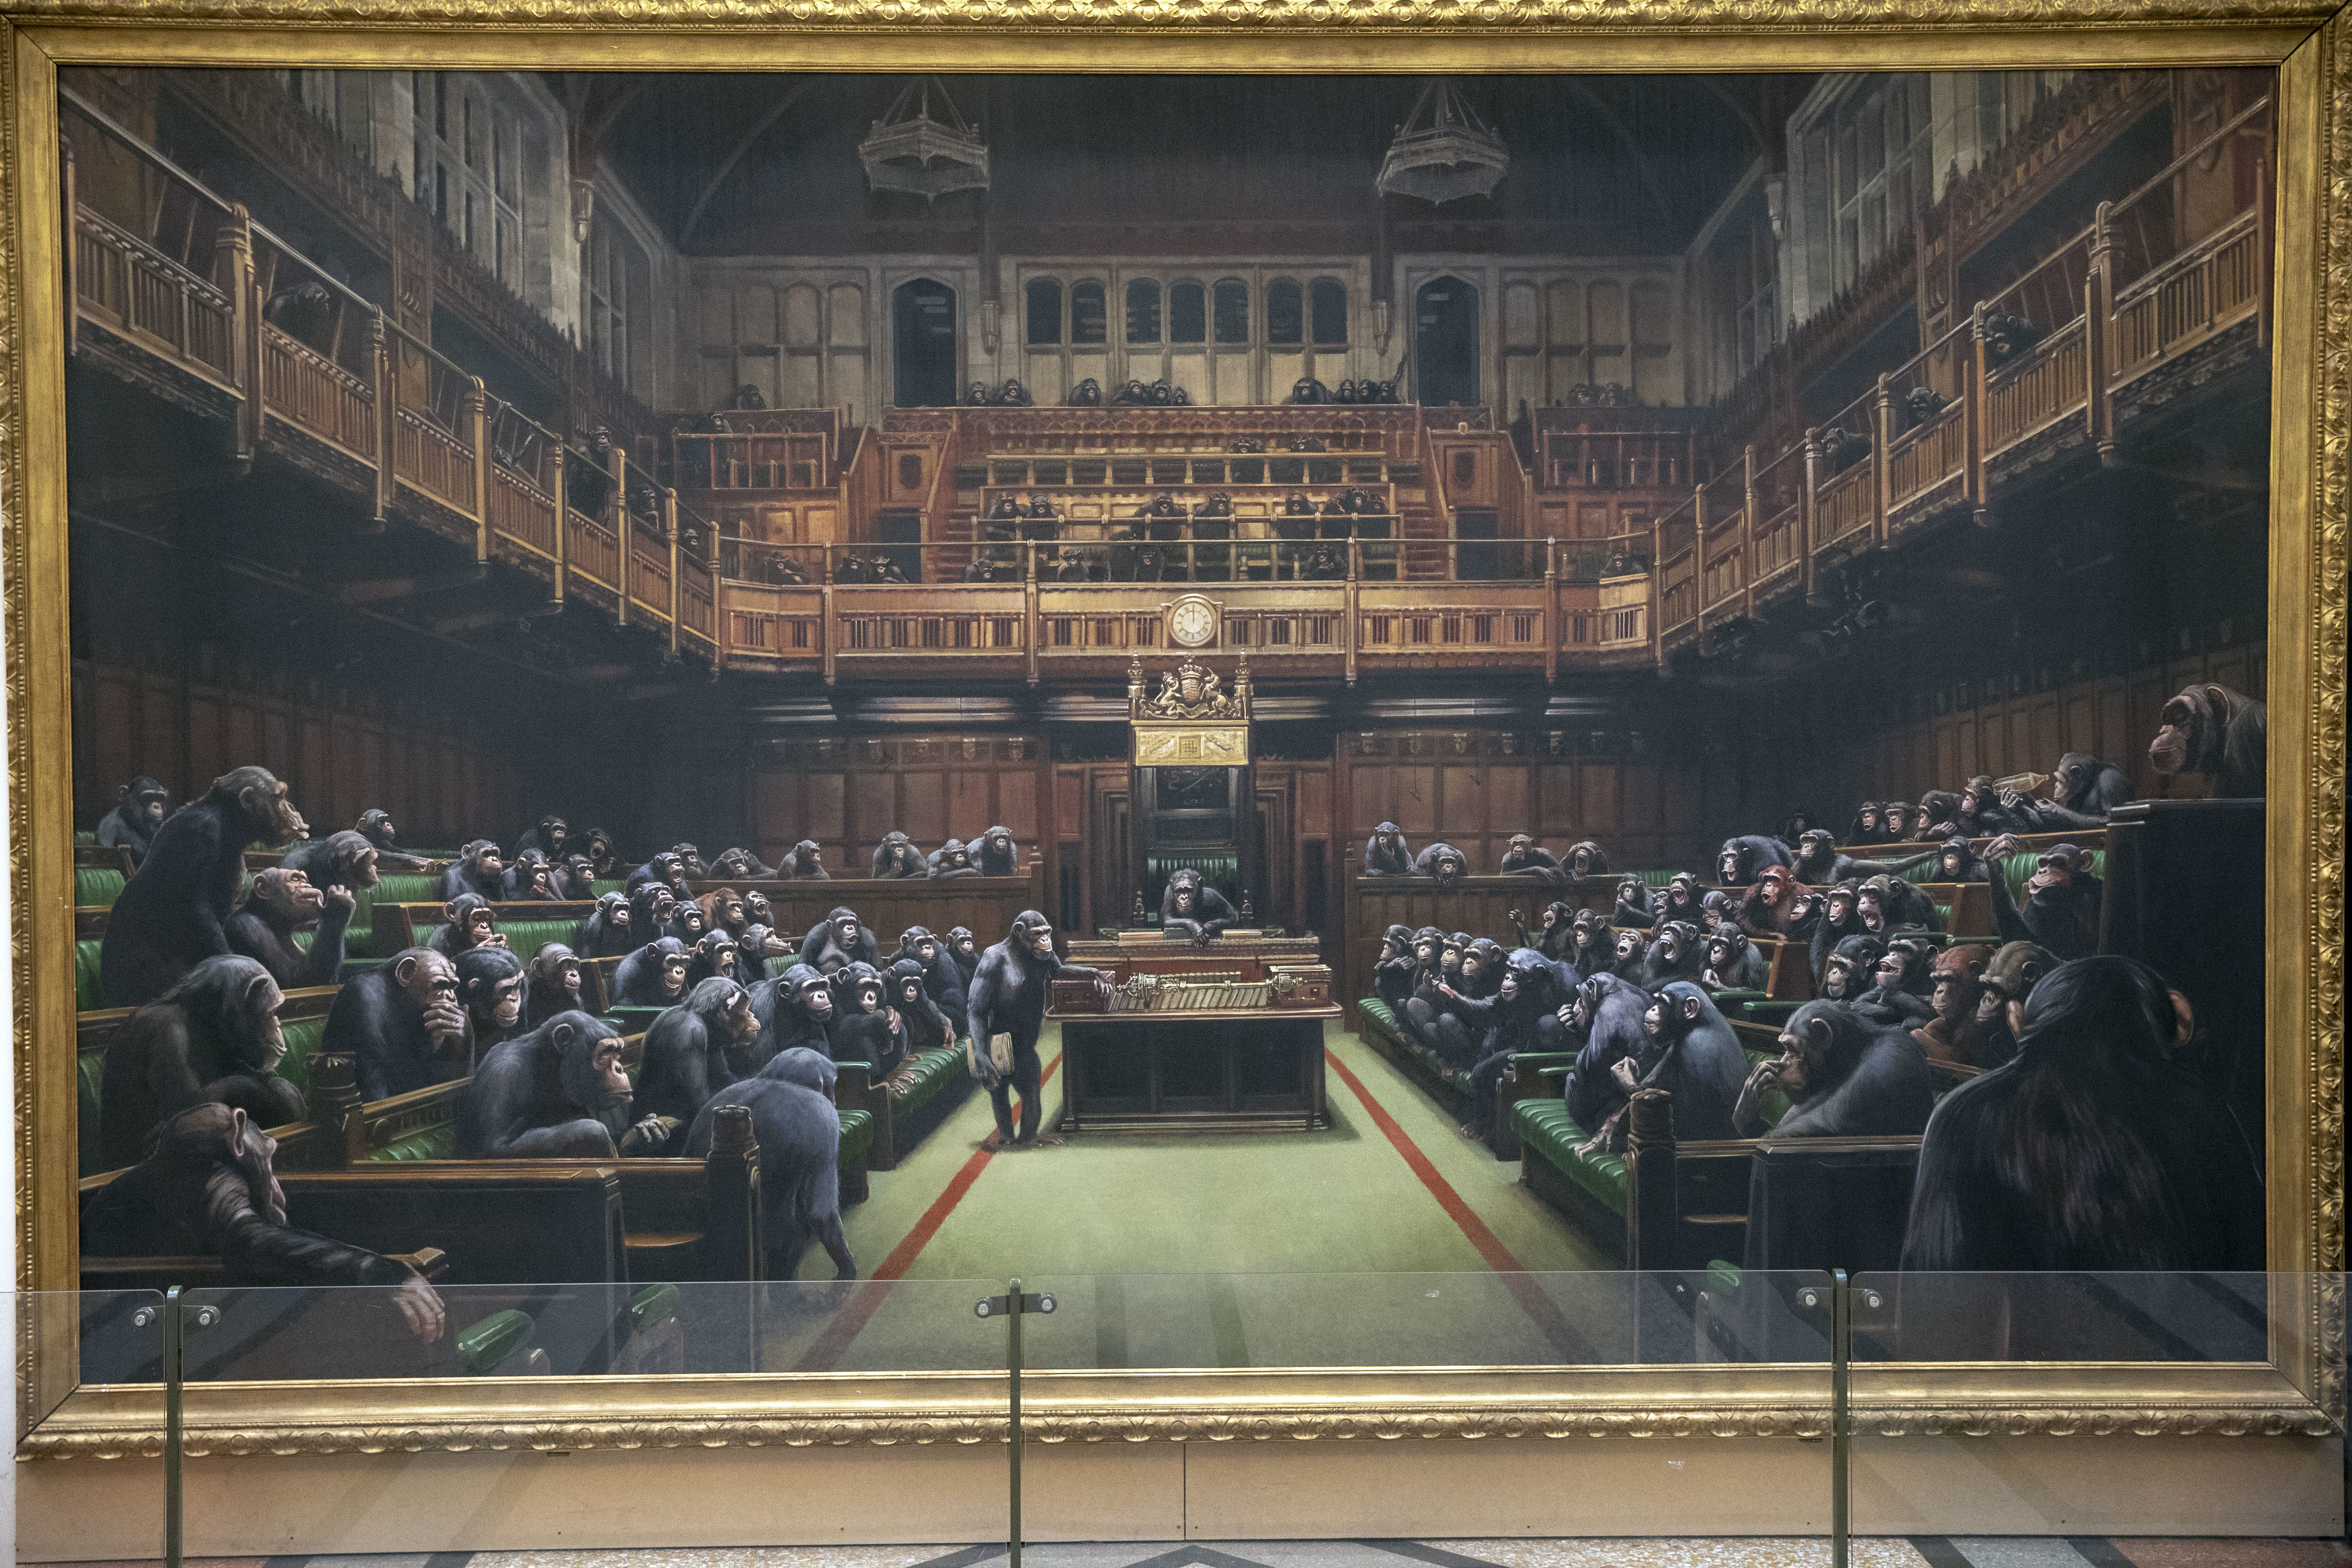 Bristol-born anonymous artist Banksy's Devolved Parliament, first displayed in 2009.